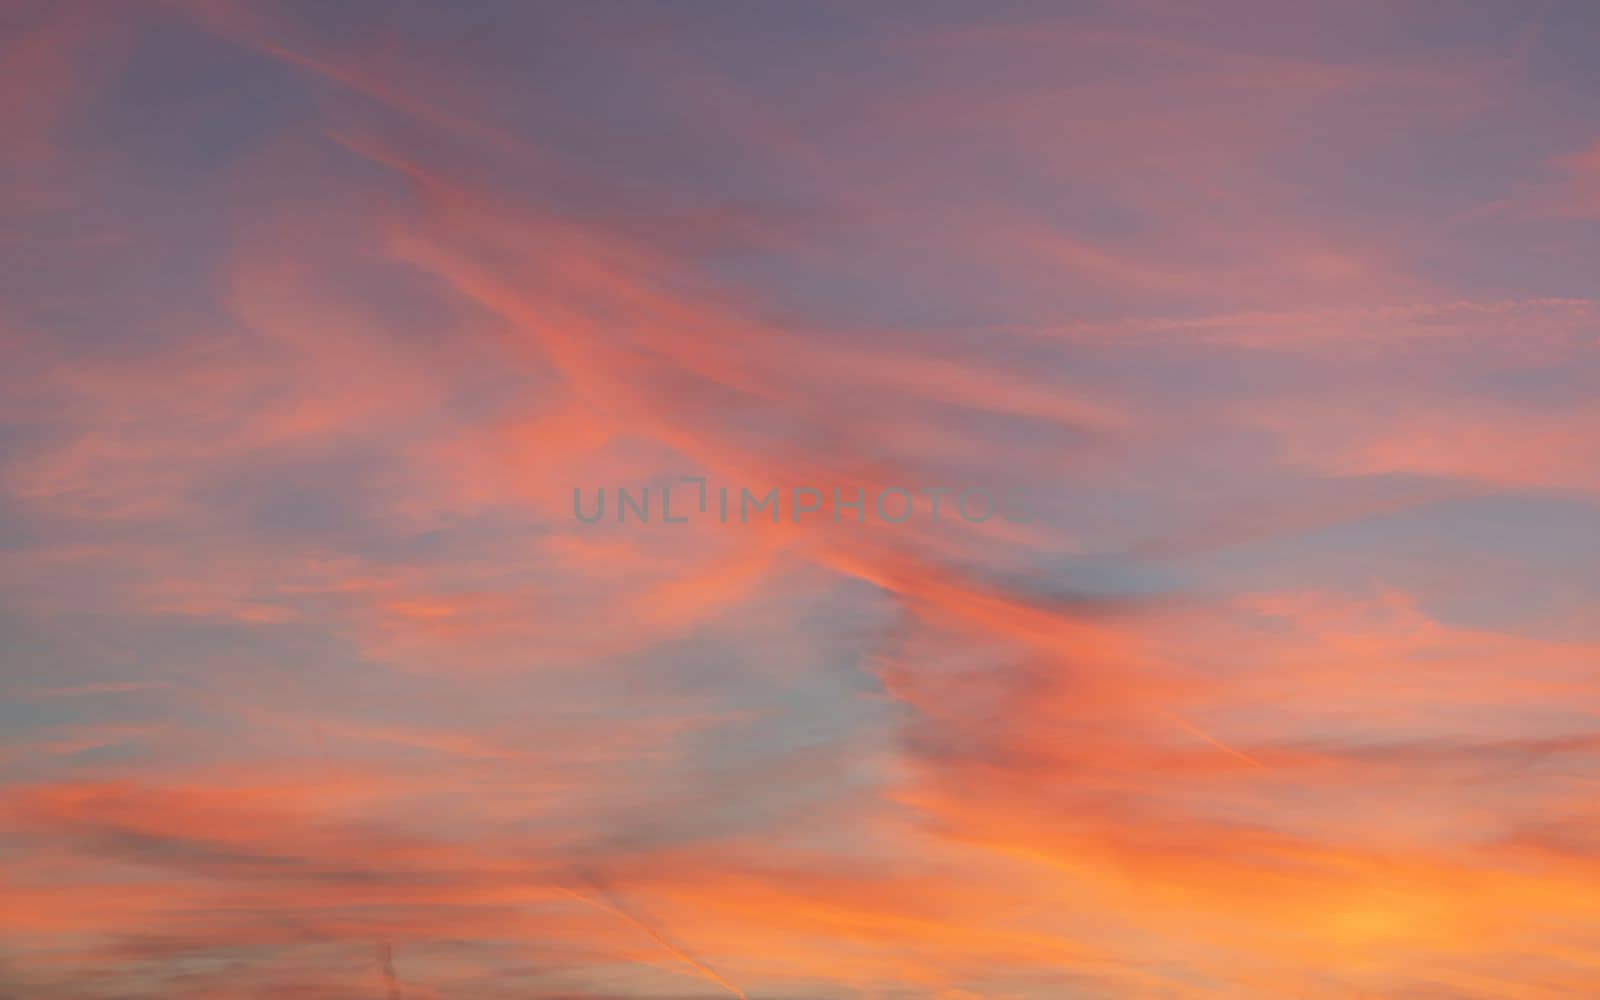 Sky with red-colored clouds by alfotokunst